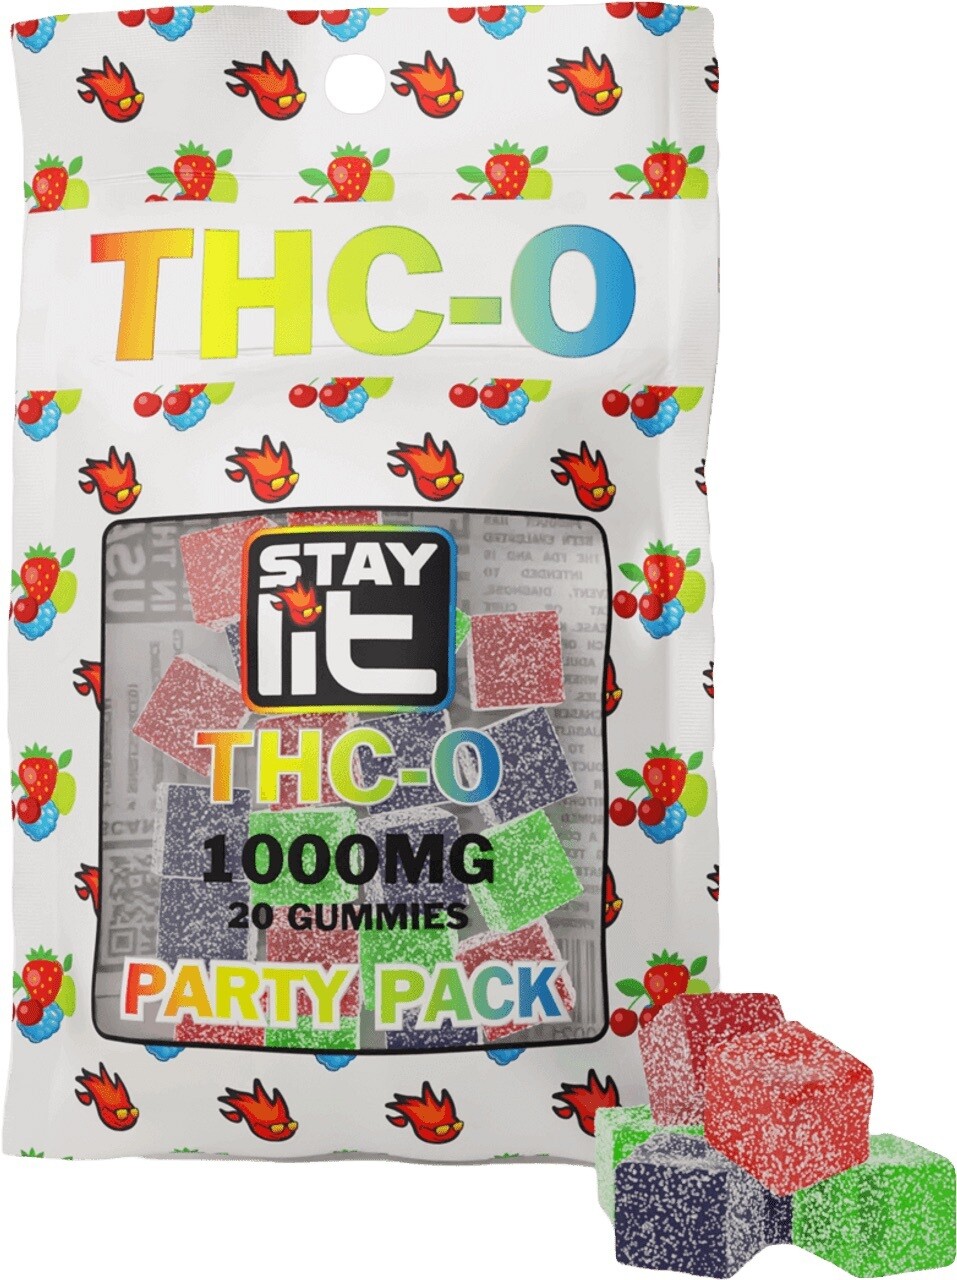 Stay Lit Chews THC-O Party Pack 1000mg Edible